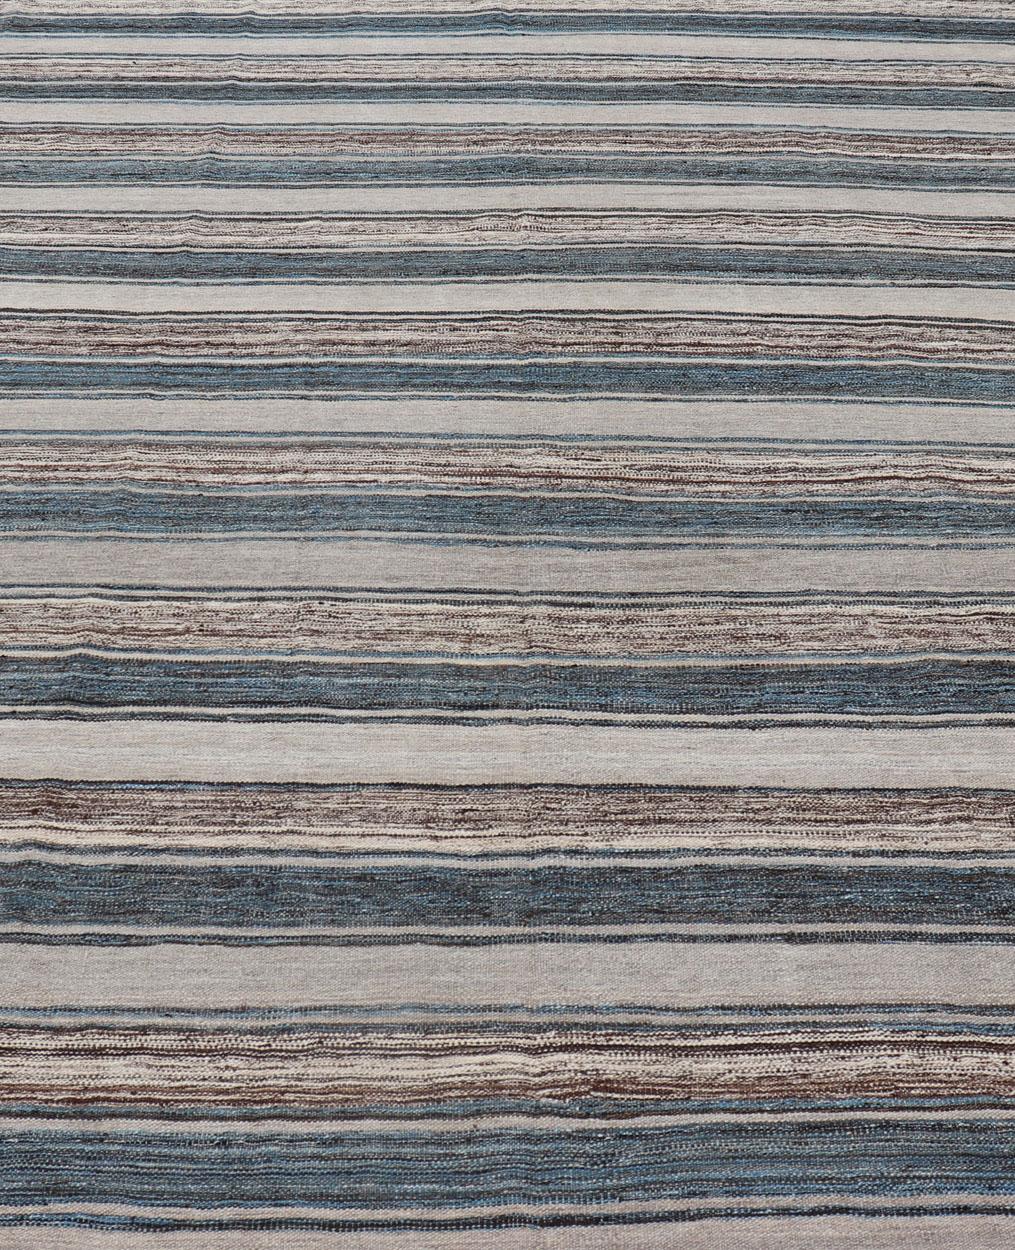 Contemporary Versatile and Natural Brown, Cream, and Blue Striped Flat-Weave Kilim For Sale